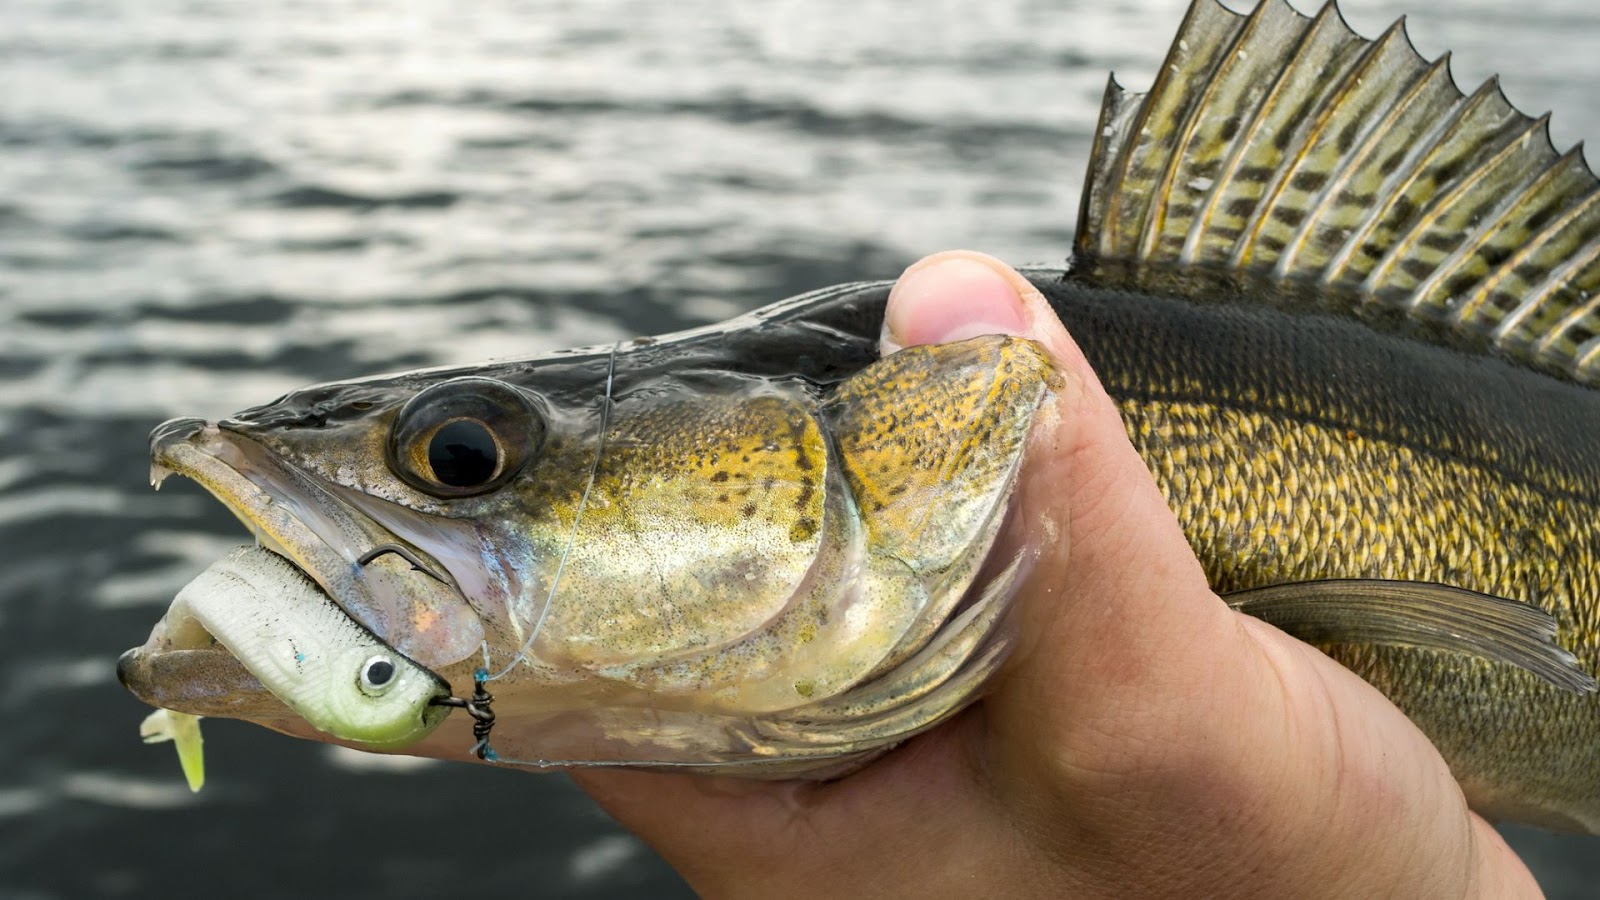 regulations and ethics when to keep or release walleye fish - targeting big walleye fish and ice fishing